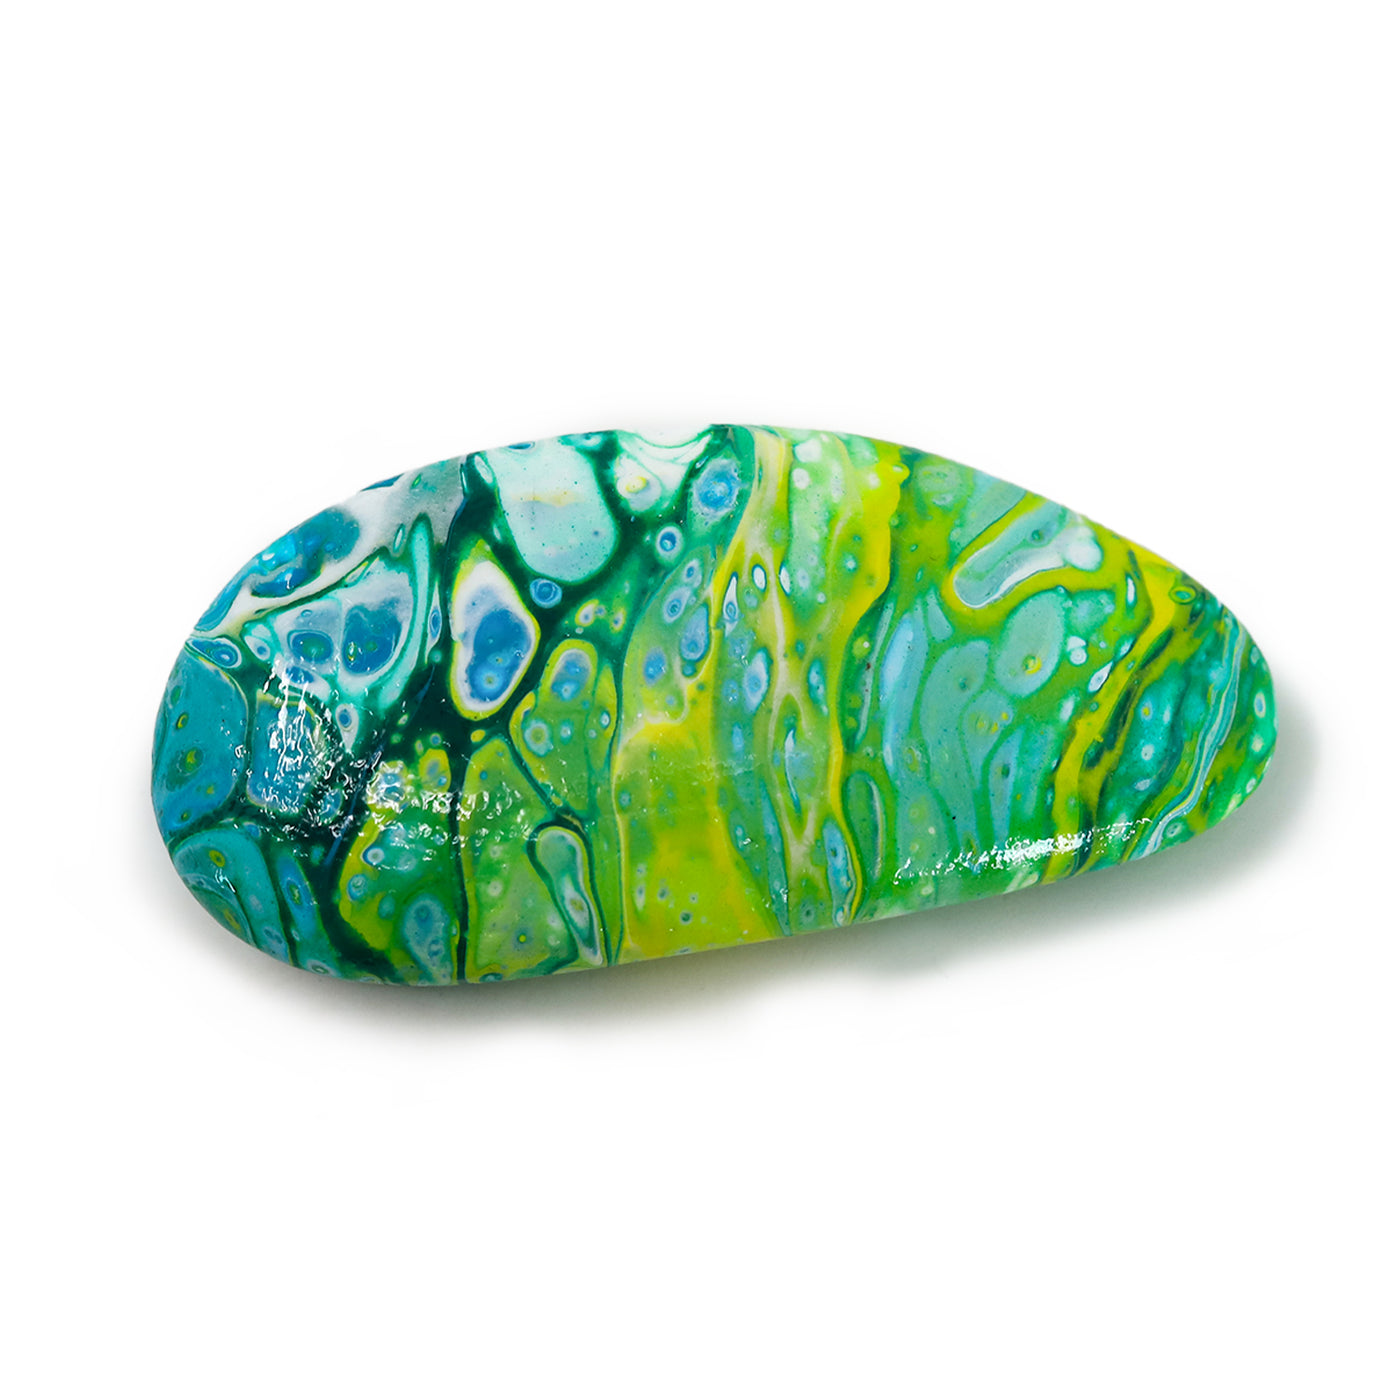 Acrylic Poured Painted Rock #1